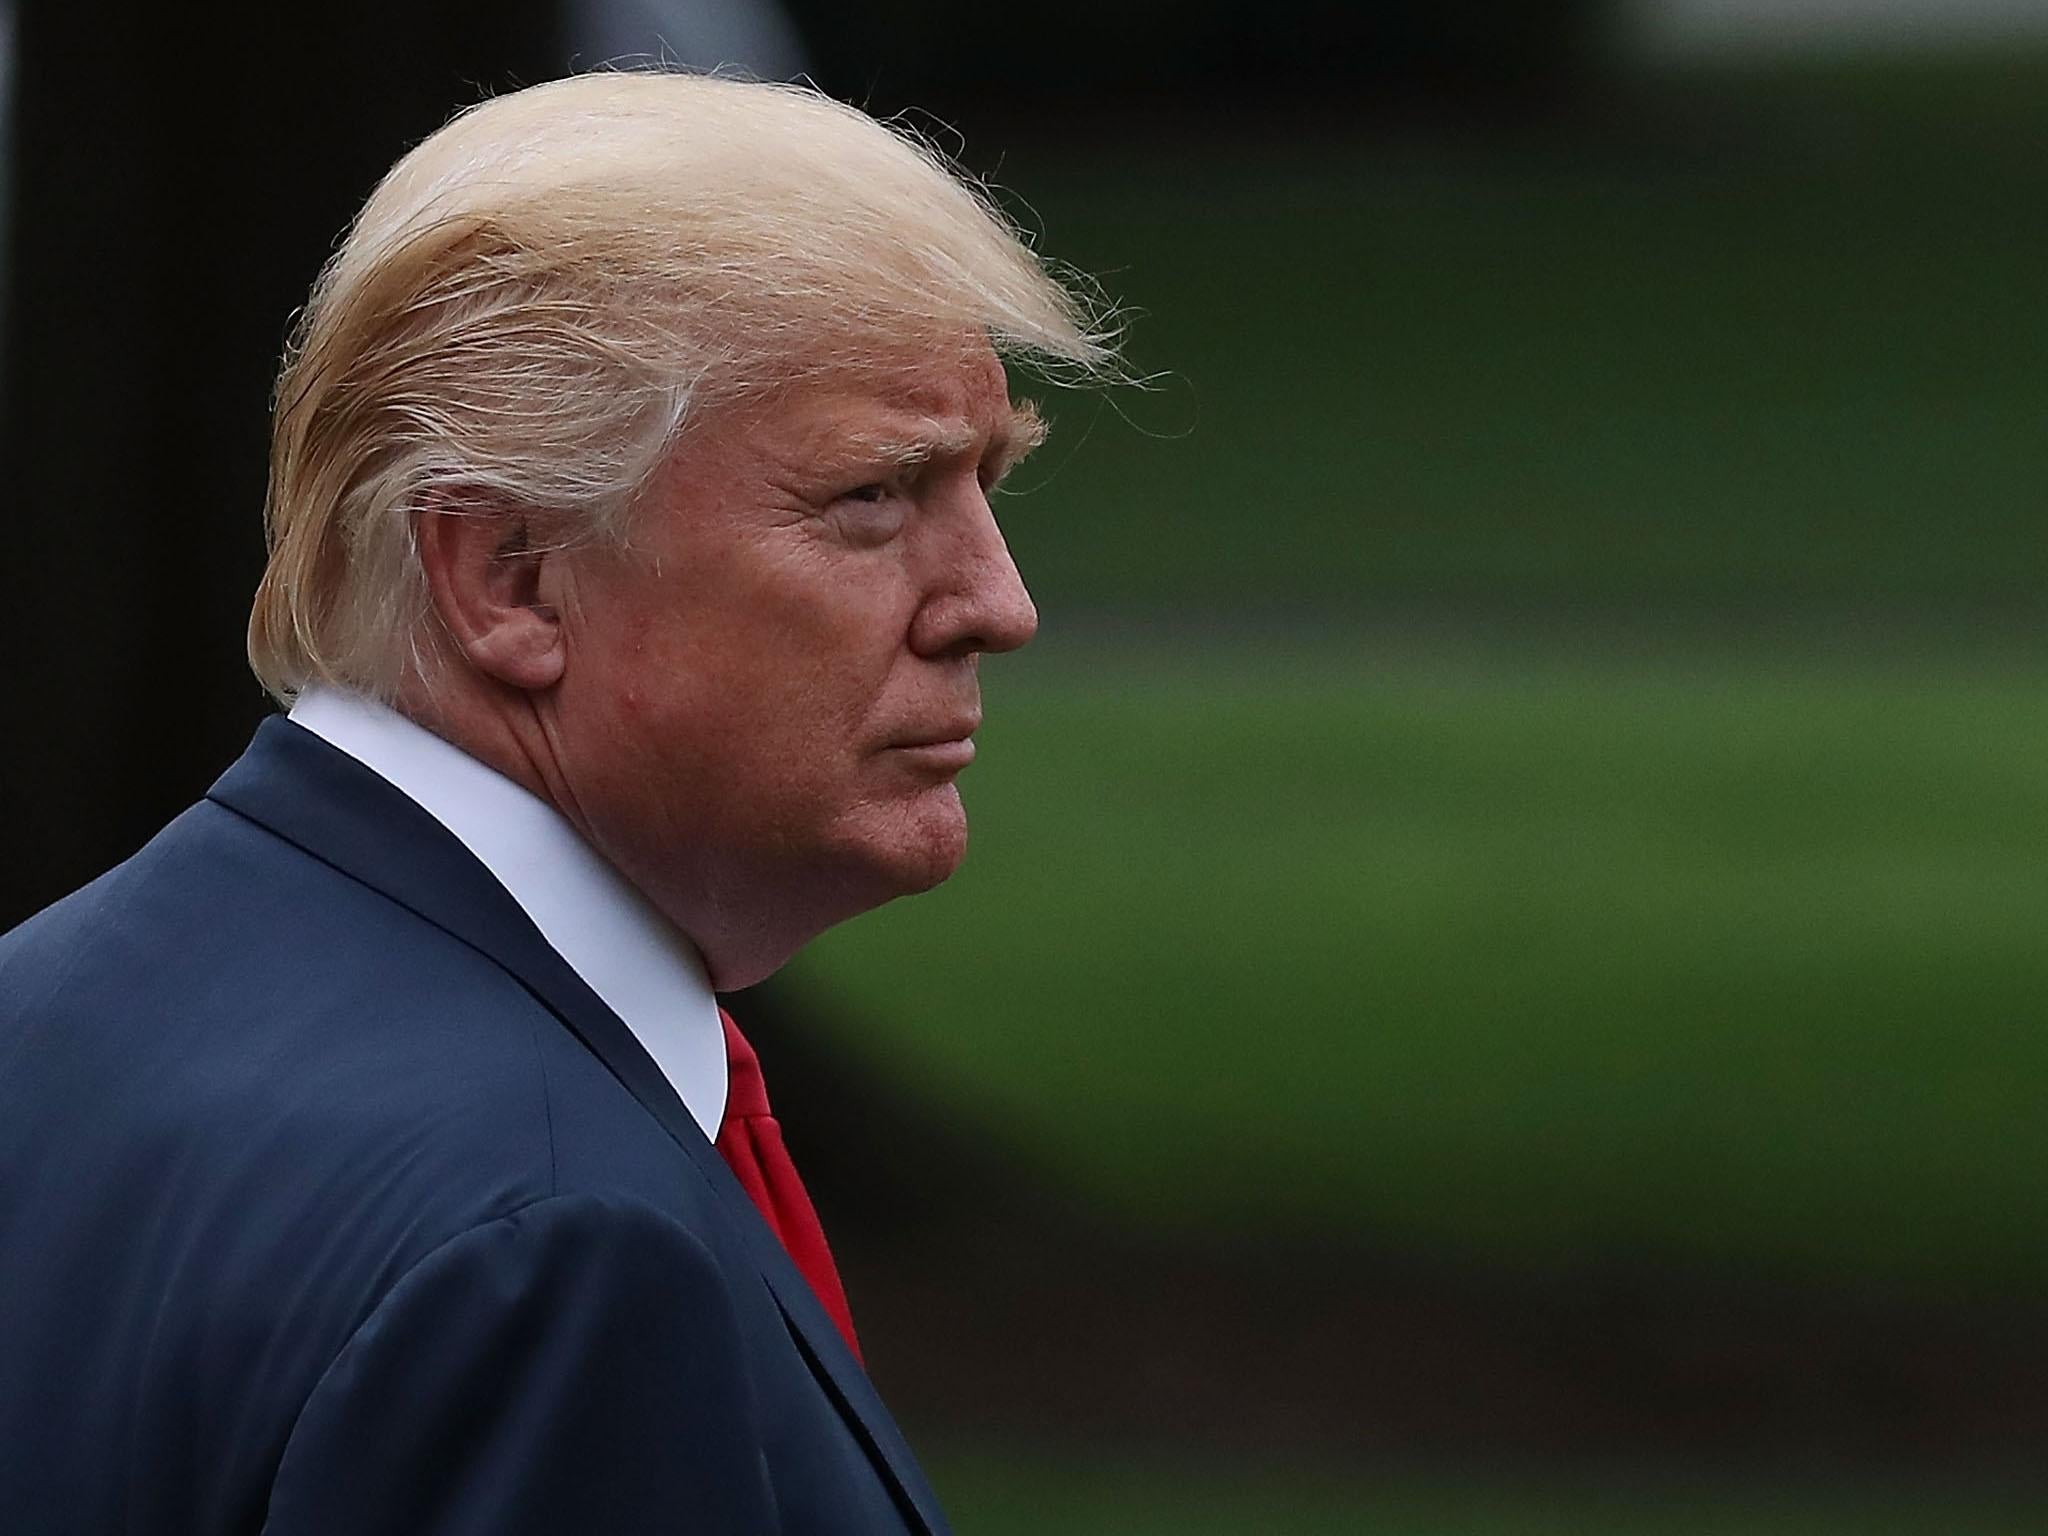 A Pew Global poll found last month that around three quarters of those surveyed had little or no confidence in Trump's international leadership and policies